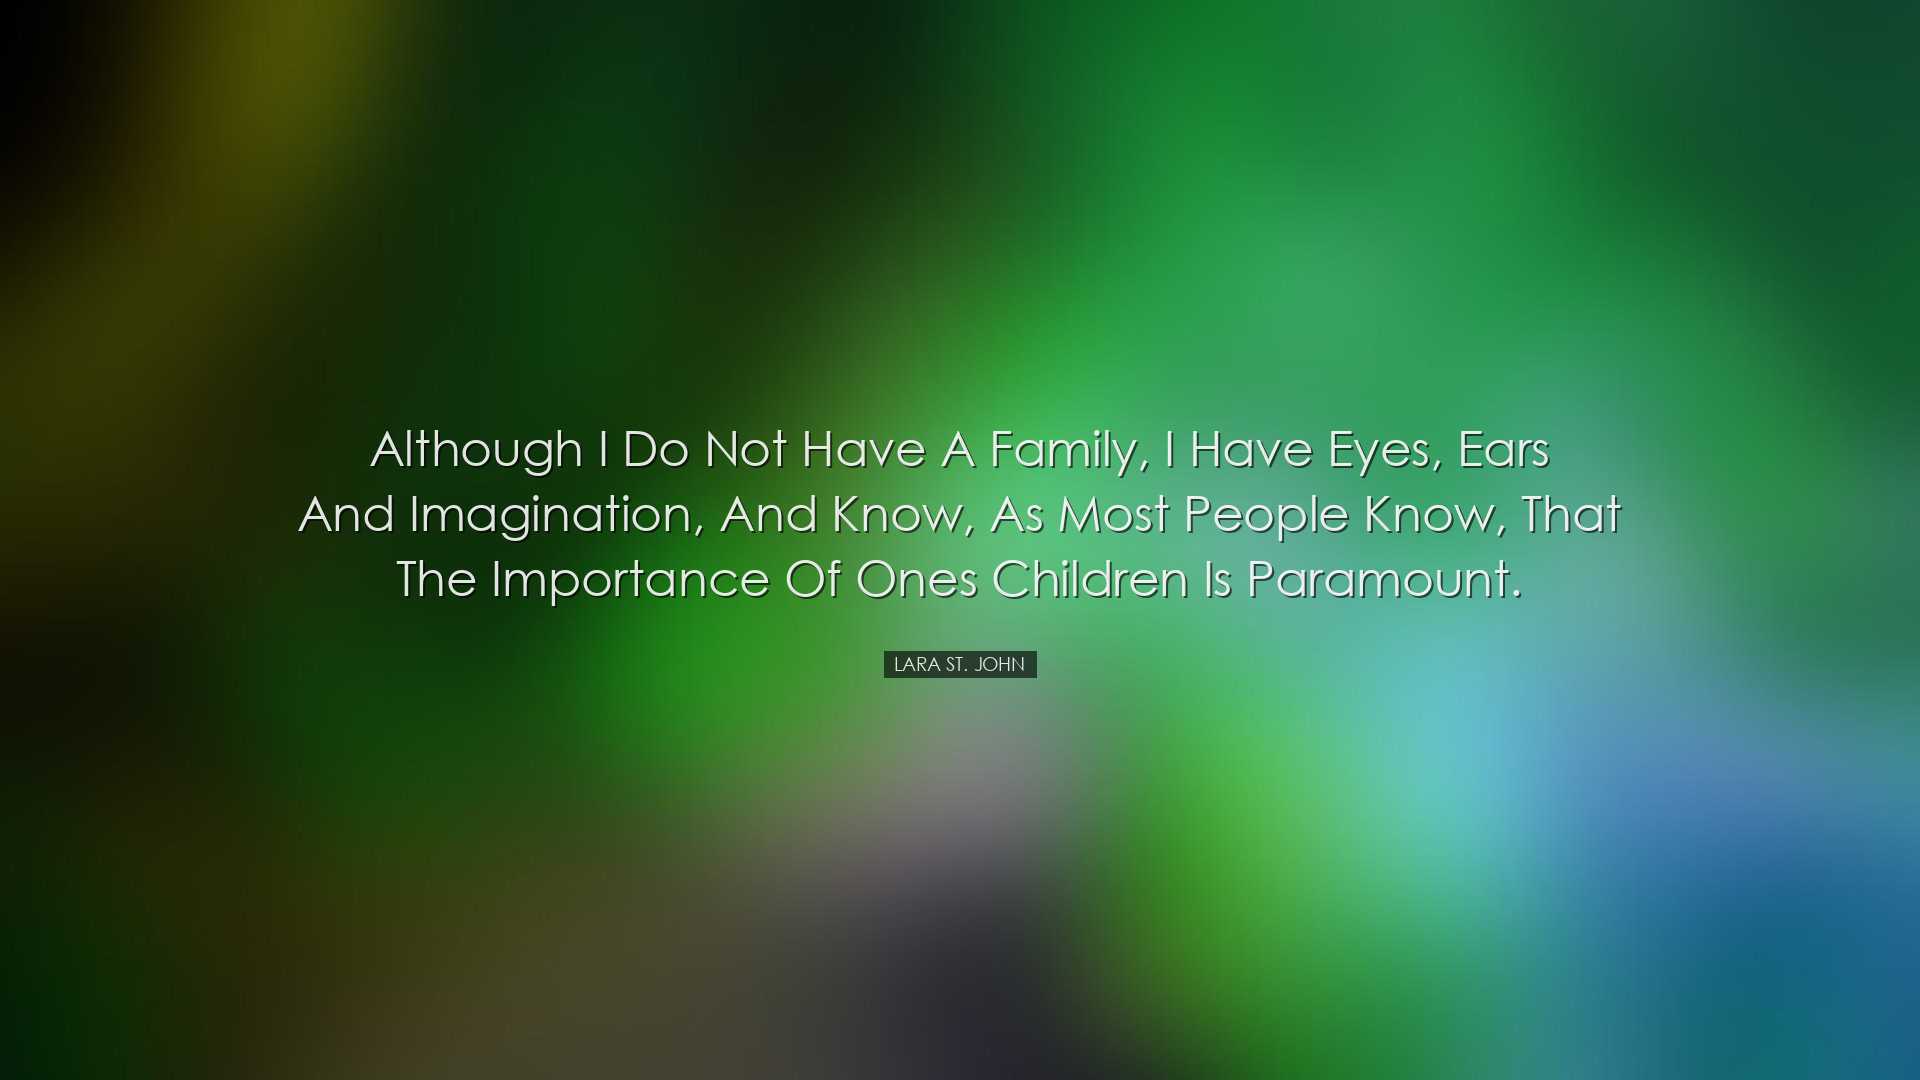 Although I do not have a family, I have eyes, ears and imagination